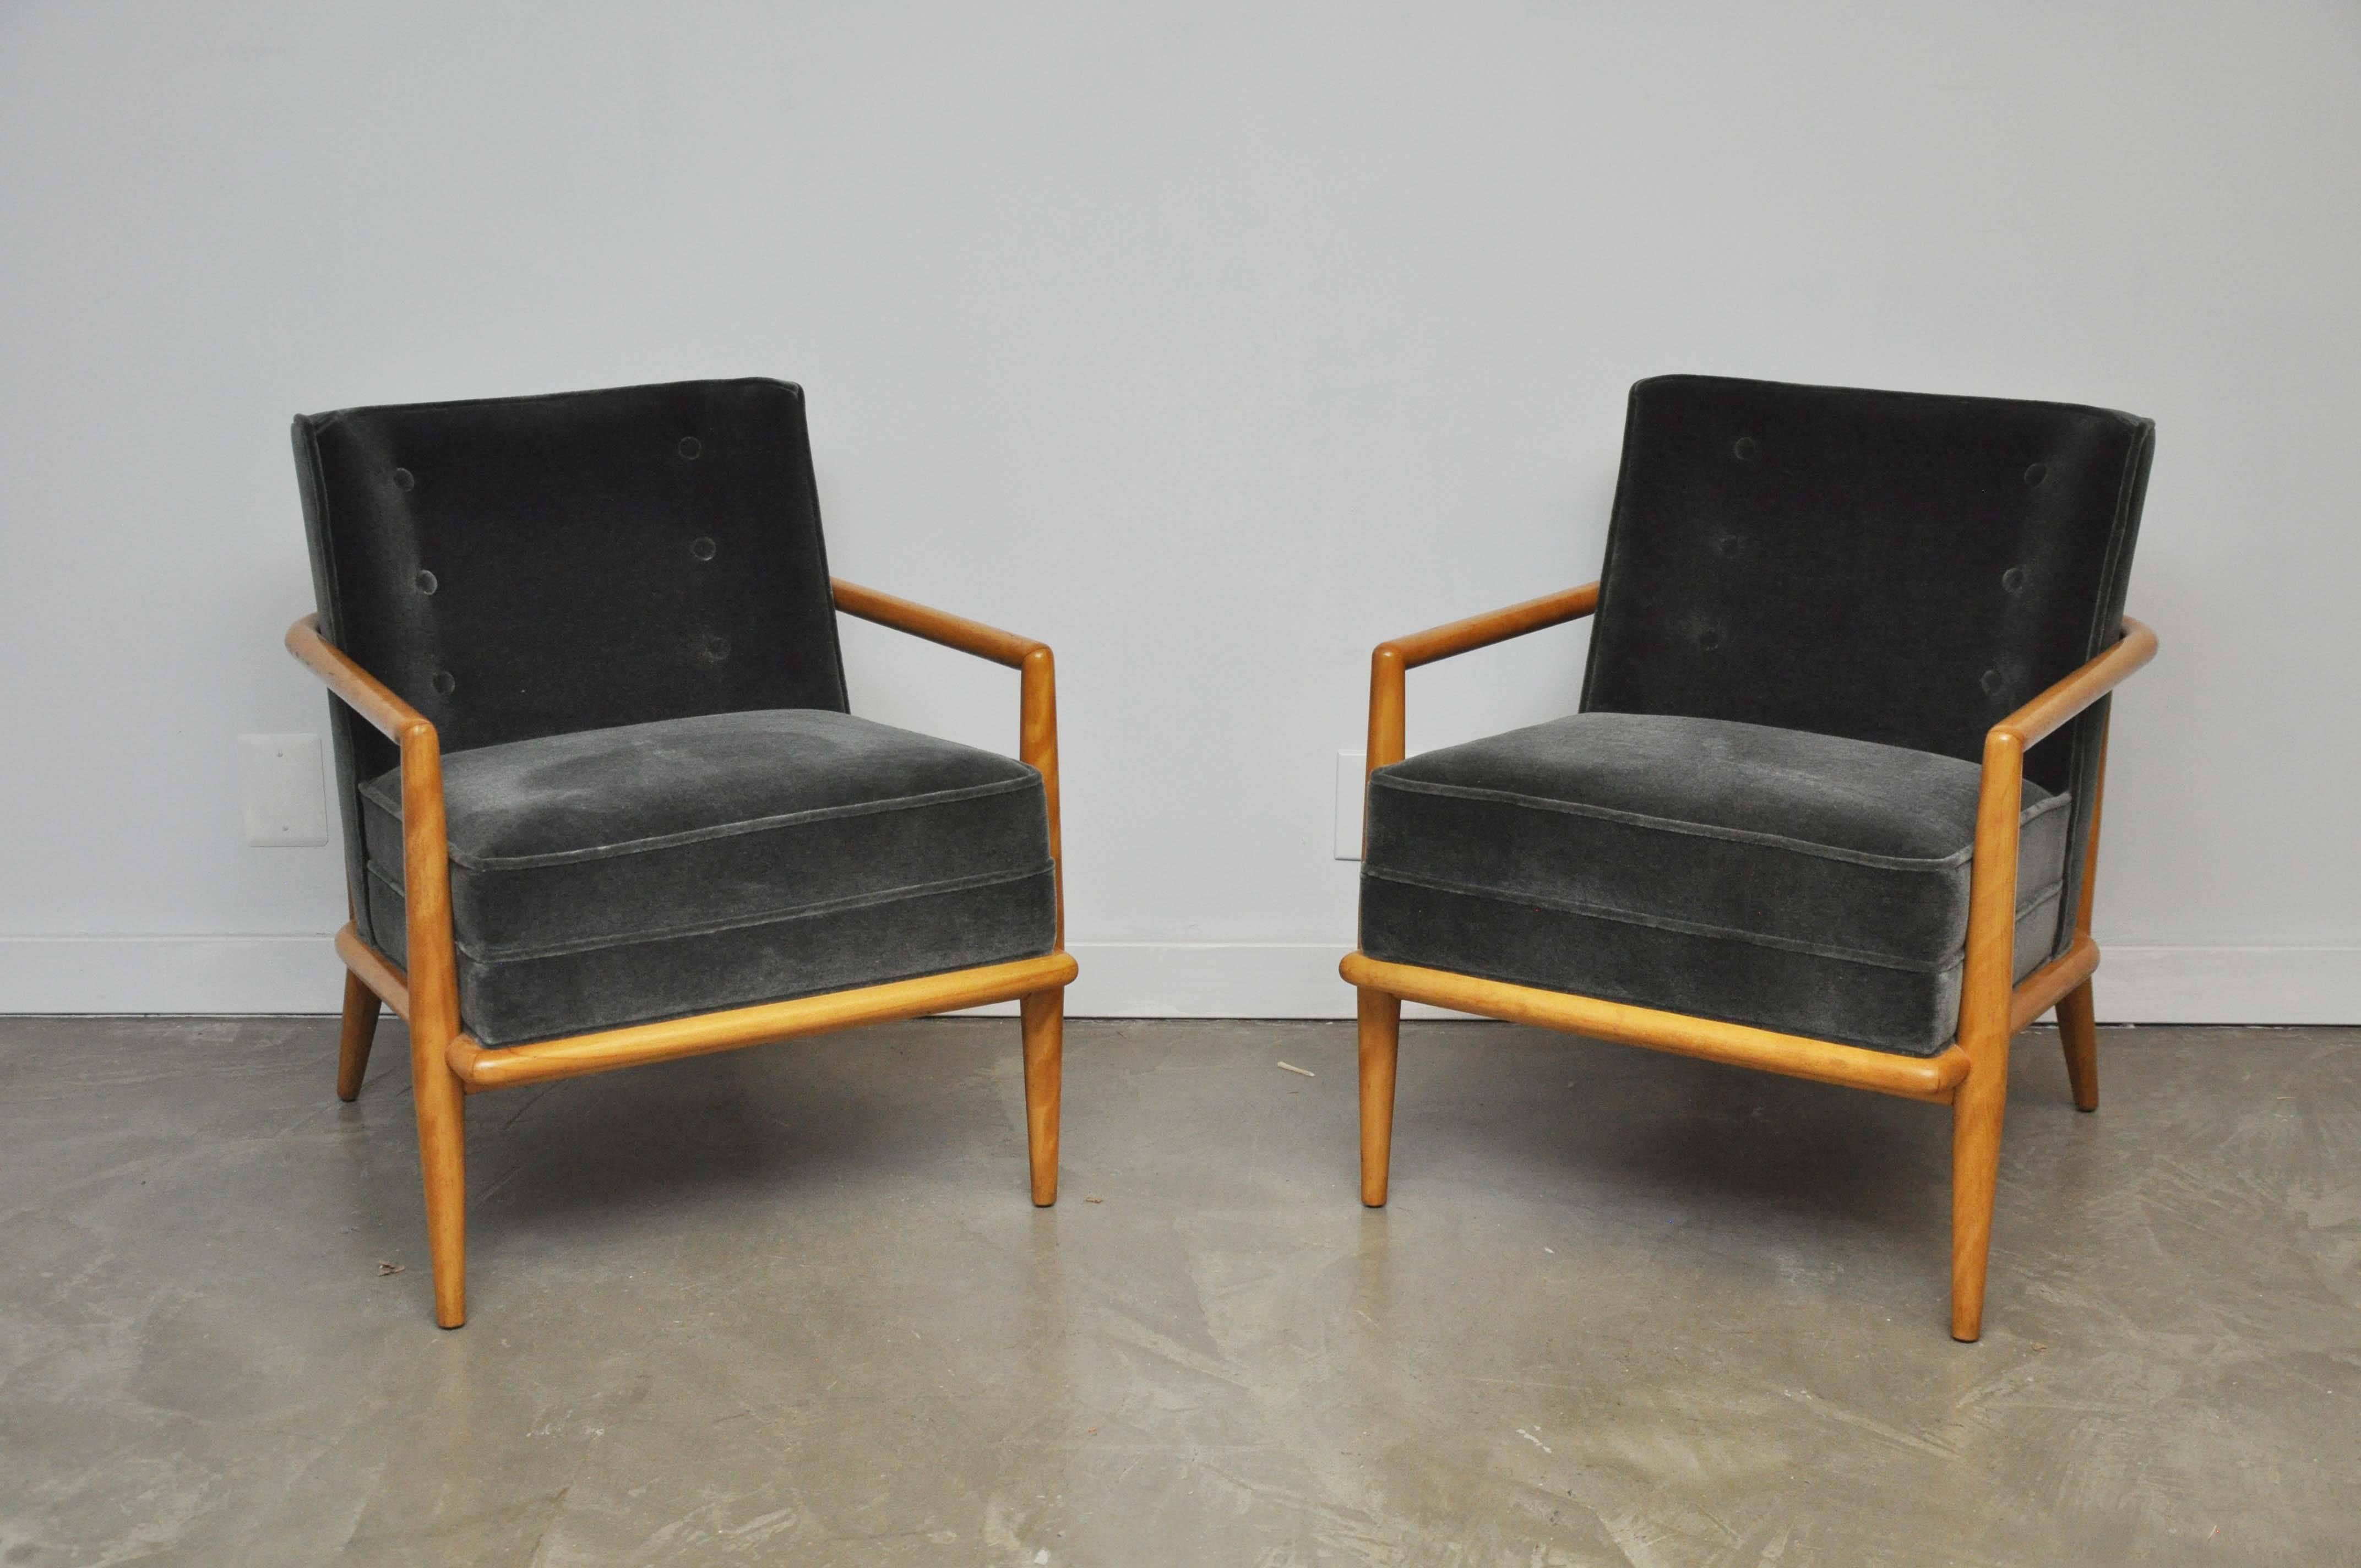 T.H. Robsjohn-Gibbings designed lounge chairs for Widdicomb. Original wood finish in excellent condition. Newly upholstered in charcoal mohair.